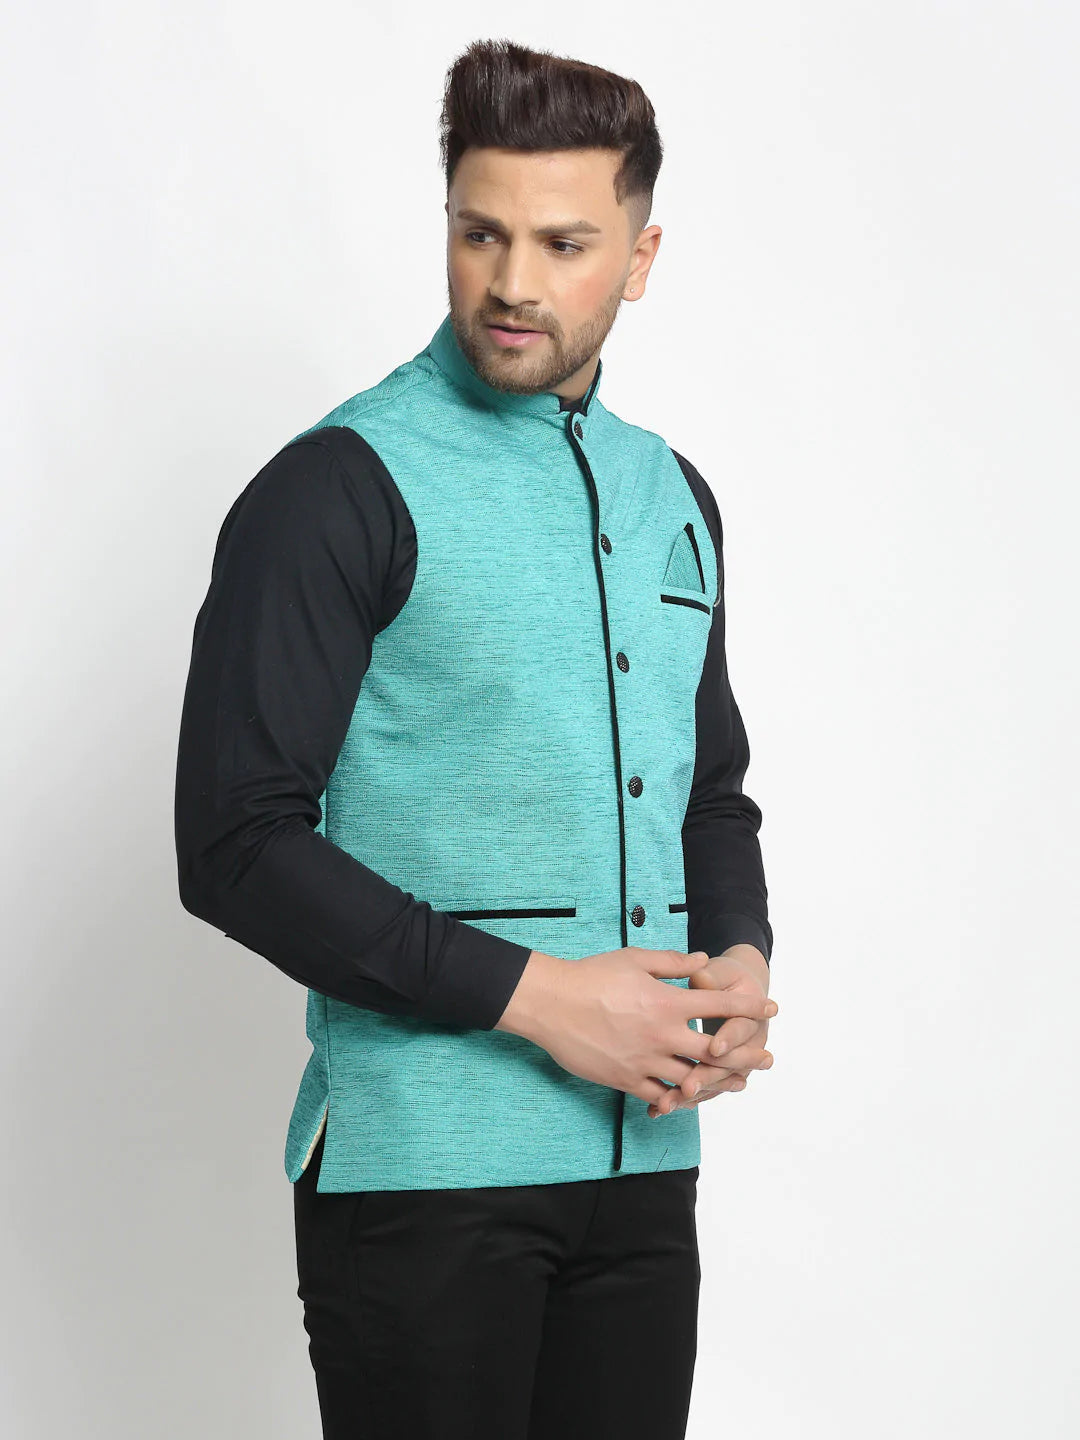 Jompers Men's Blue Solid Nehru Jacket with Square Pocket ( JOWC 4024Sky )